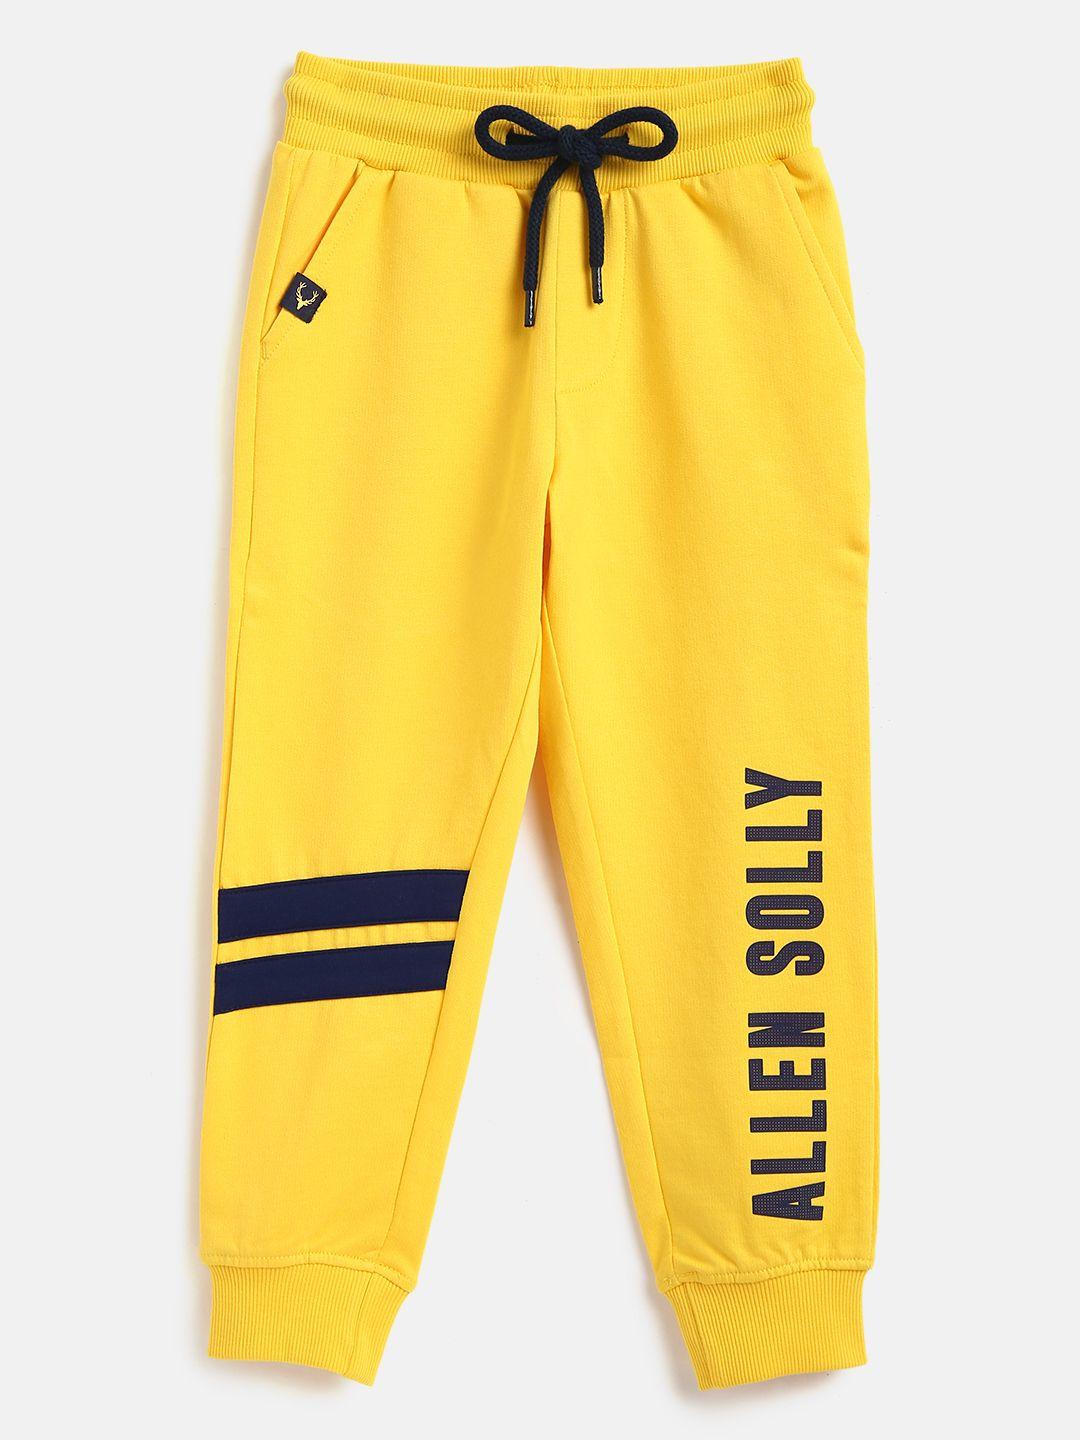 allen solly junior boys yellow & navy cotton solid joggers with brand logo print detail